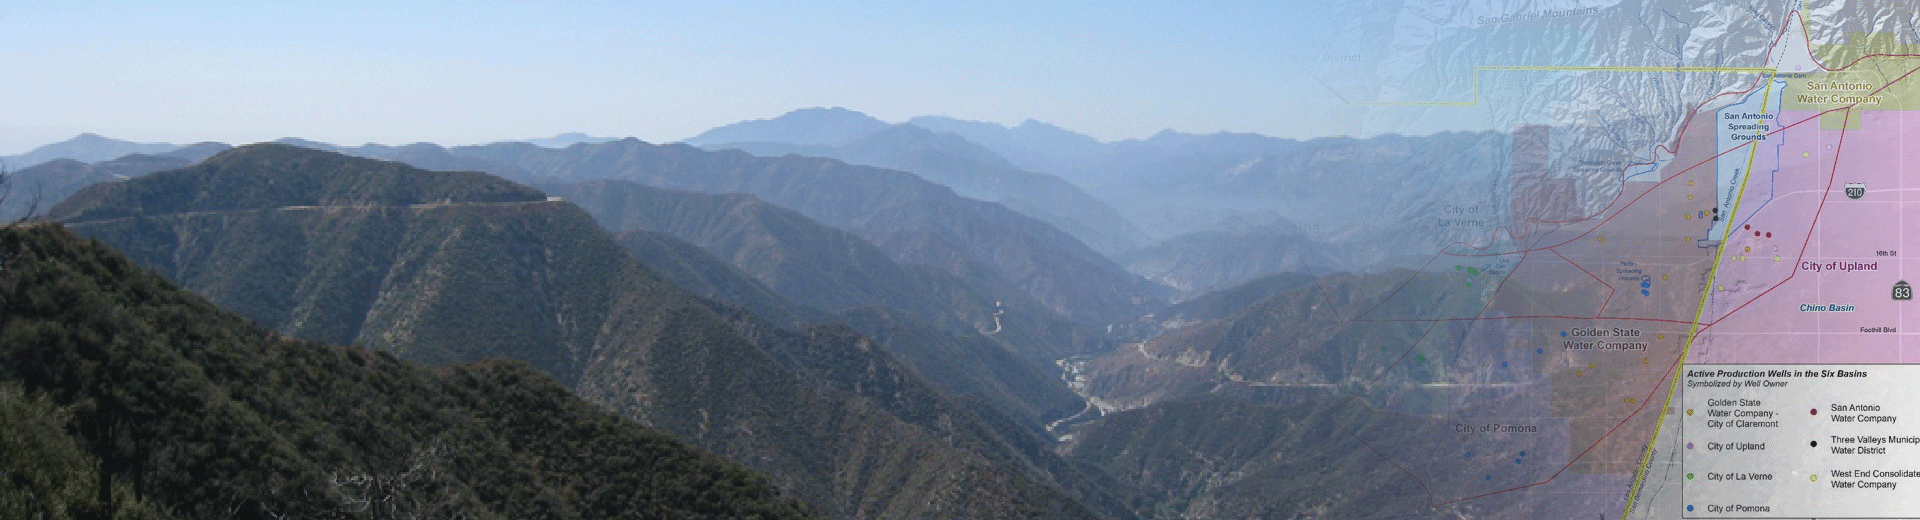 San Gabriel Valley Mountains and map of the six basins